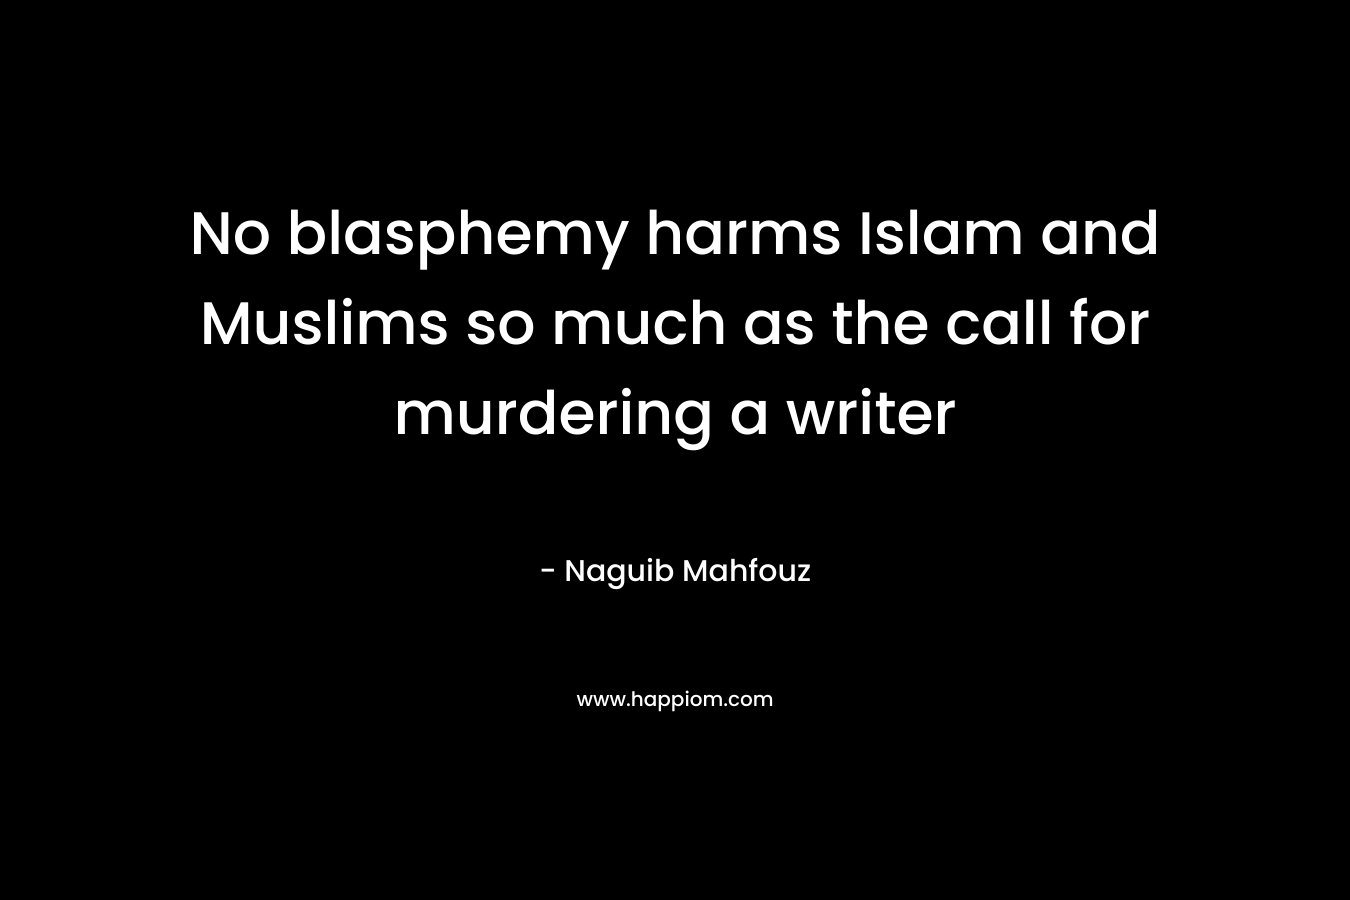 No blasphemy harms Islam and Muslims so much as the call for murdering a writer – Naguib Mahfouz